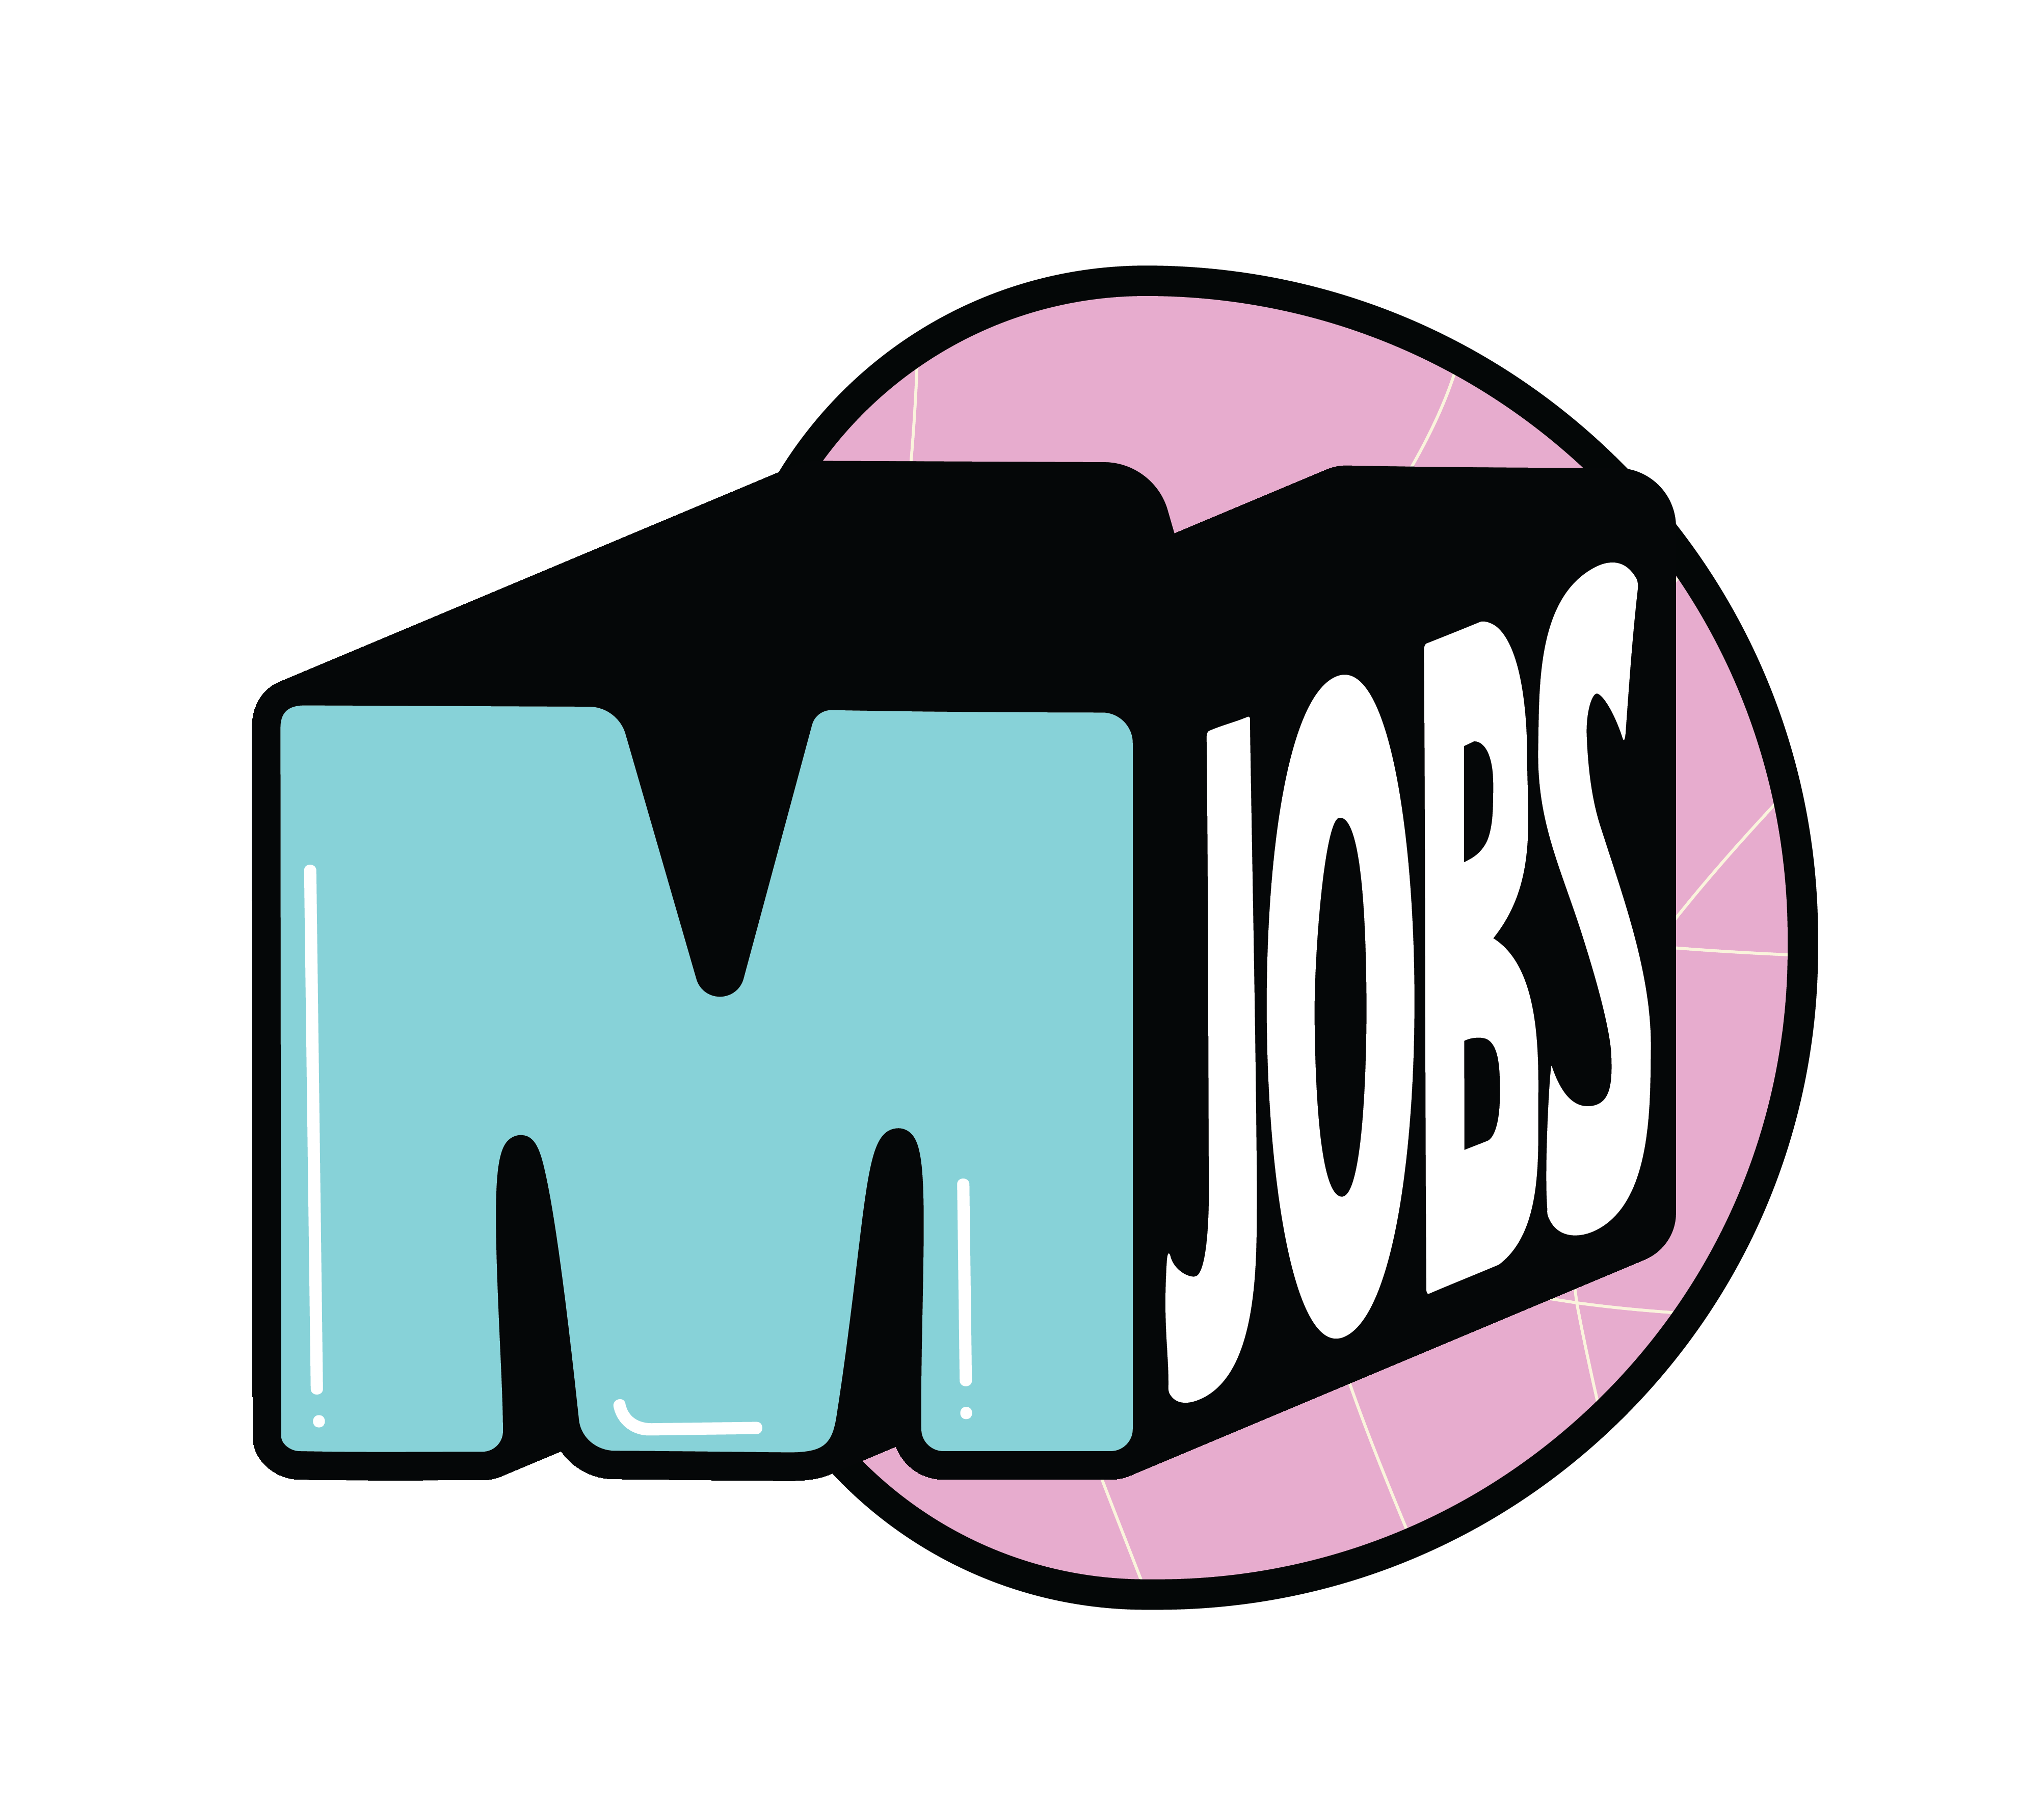 Jobs currently available from Milk Education